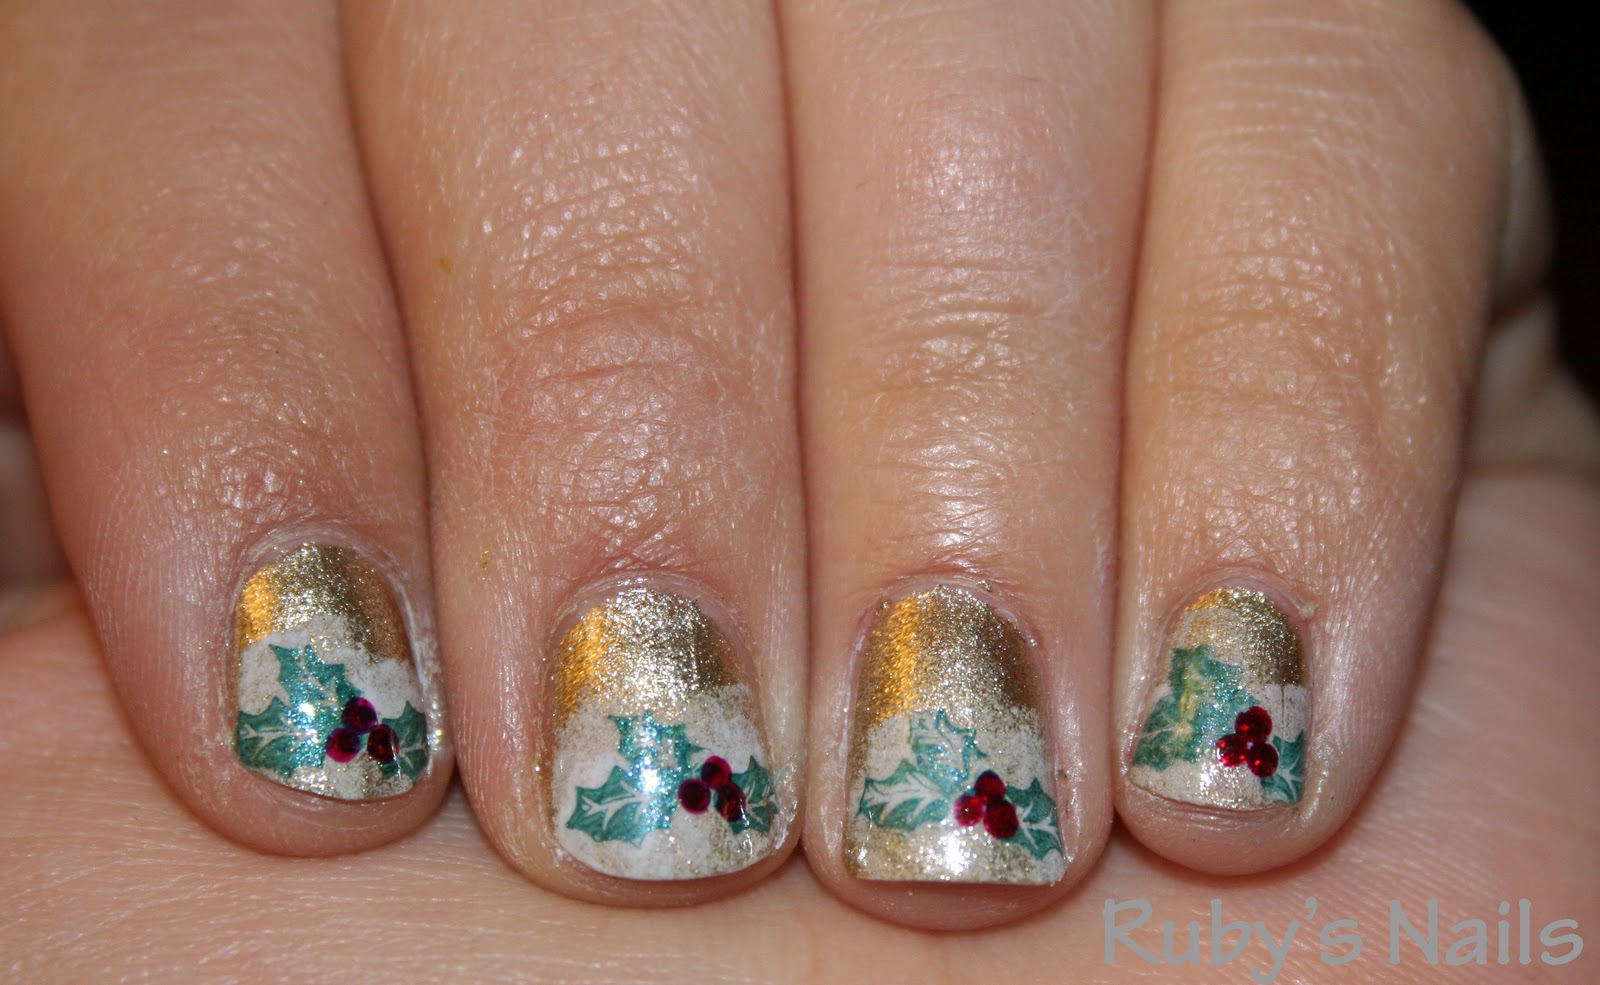 Ruby's Nails: 24 Days of Christmas Challenge, Day 12: Holly